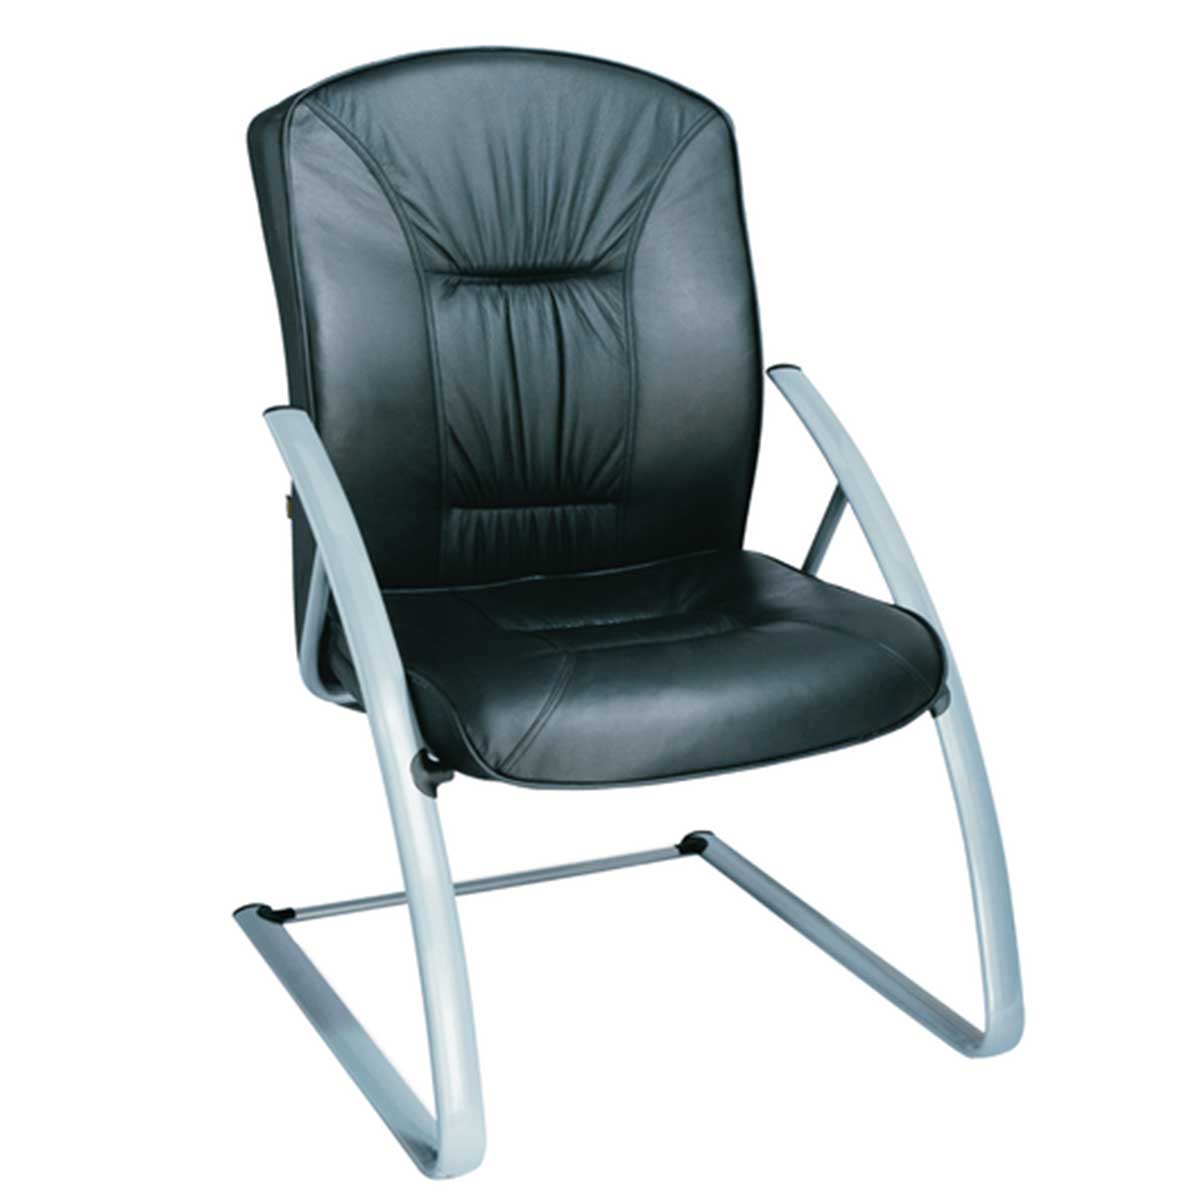 Leather office chair Manufacturers, Suppliers, Exporters in Delhi 